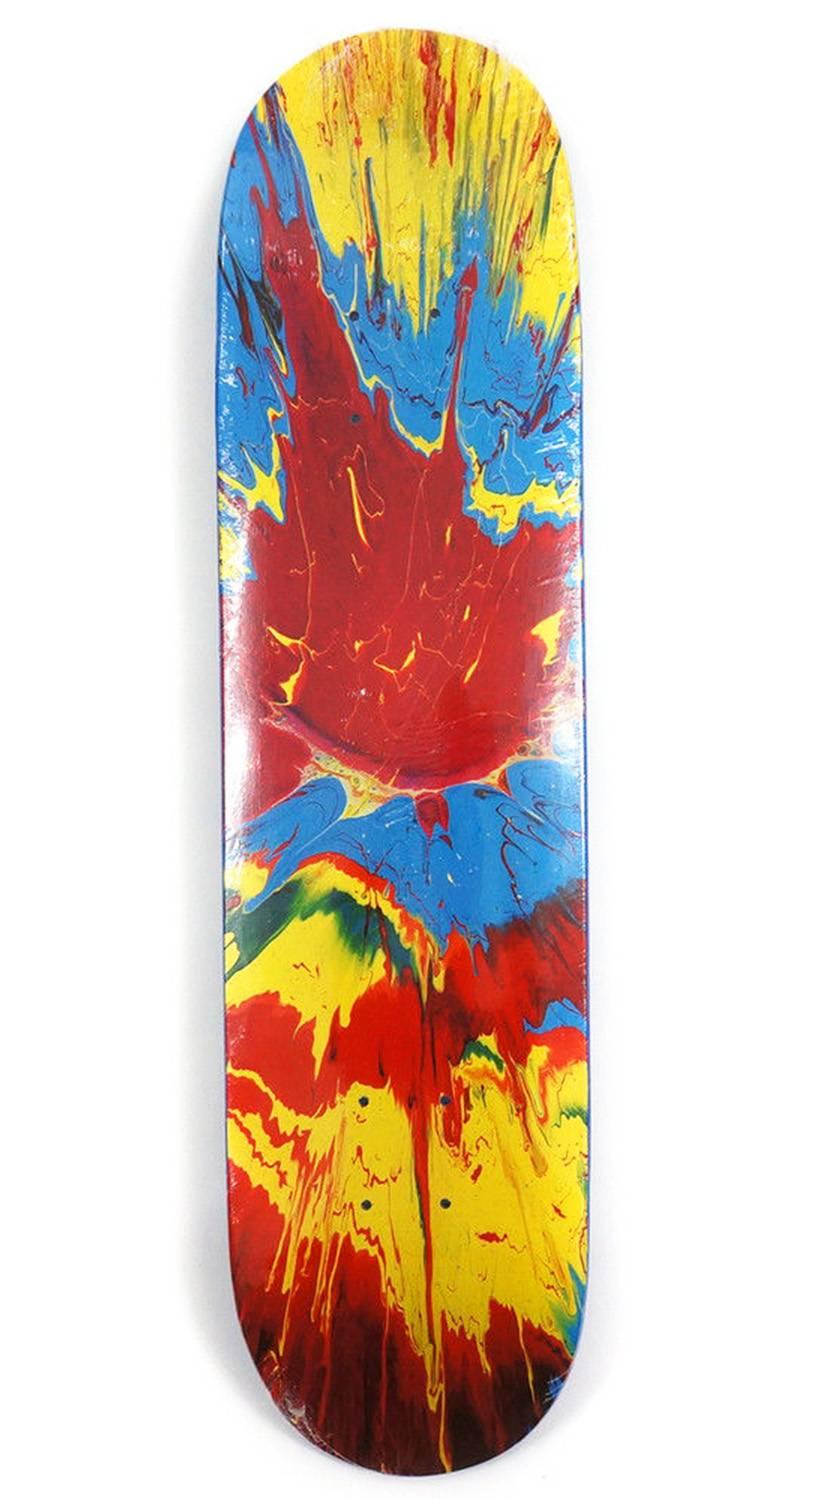 Damien Hirst Spin Series Skate Deck, Supreme 2009

Medium: Screen print in colors on polychrome wood skateboard deck.

Excellent overal condition.

Dimensions: 31.1 x 7.68 in (78.99 x 19.51 cm).

Stamped signature and Supreme logo on